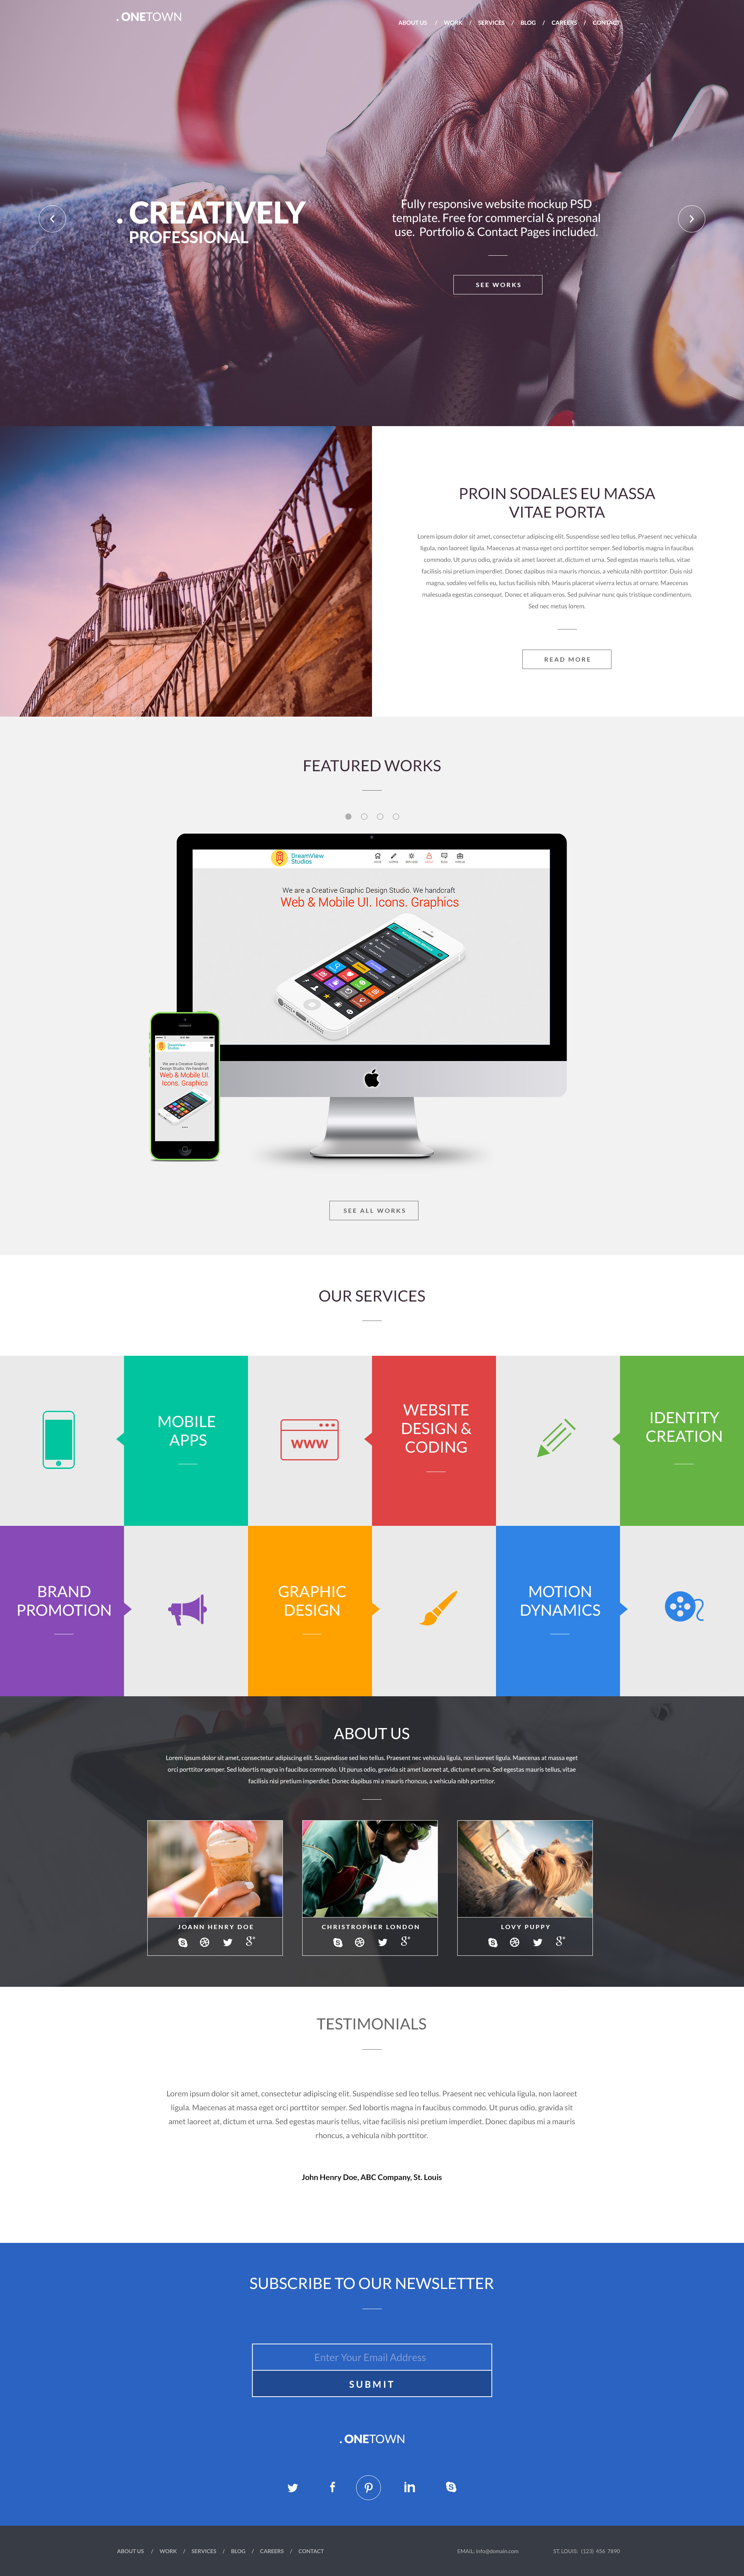 free-responsive-website-psd-templates-graphicsfuel